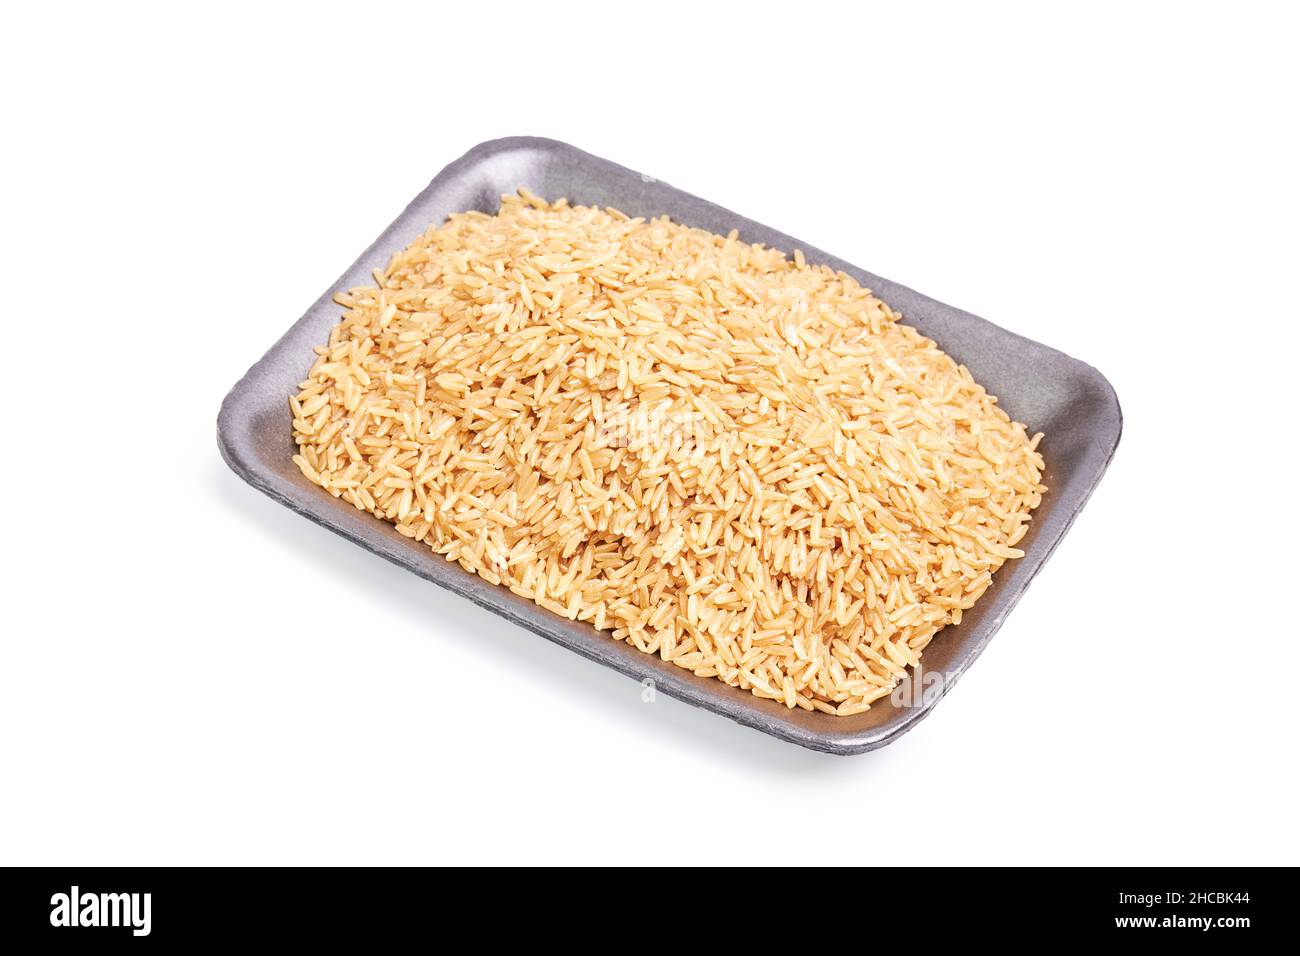 Black tray with raw rice on a white background. Asian food. Healthy food concept Stock Photo